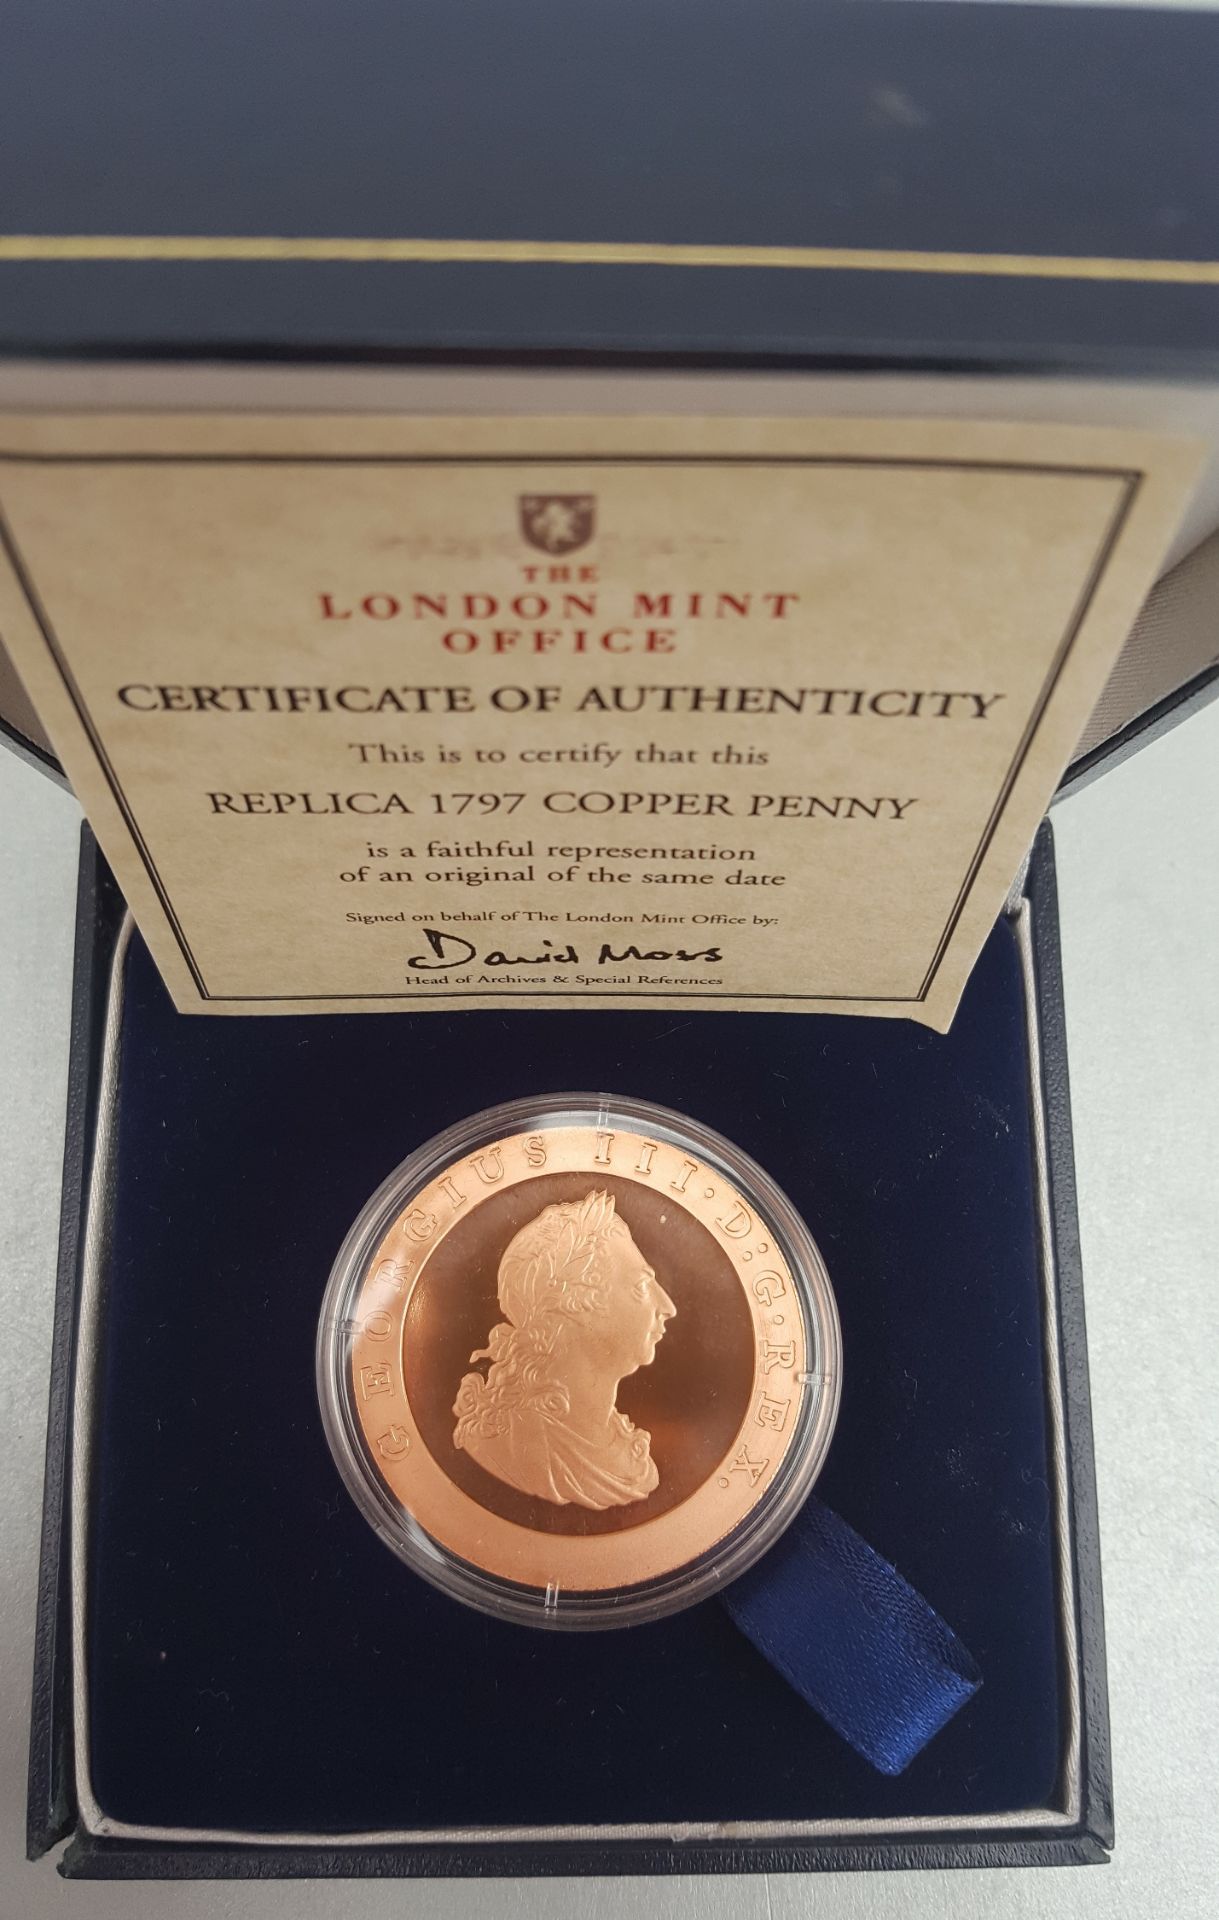 Collectable Coin London Mint Office Replica 1797 Copper Penny - Image 2 of 3